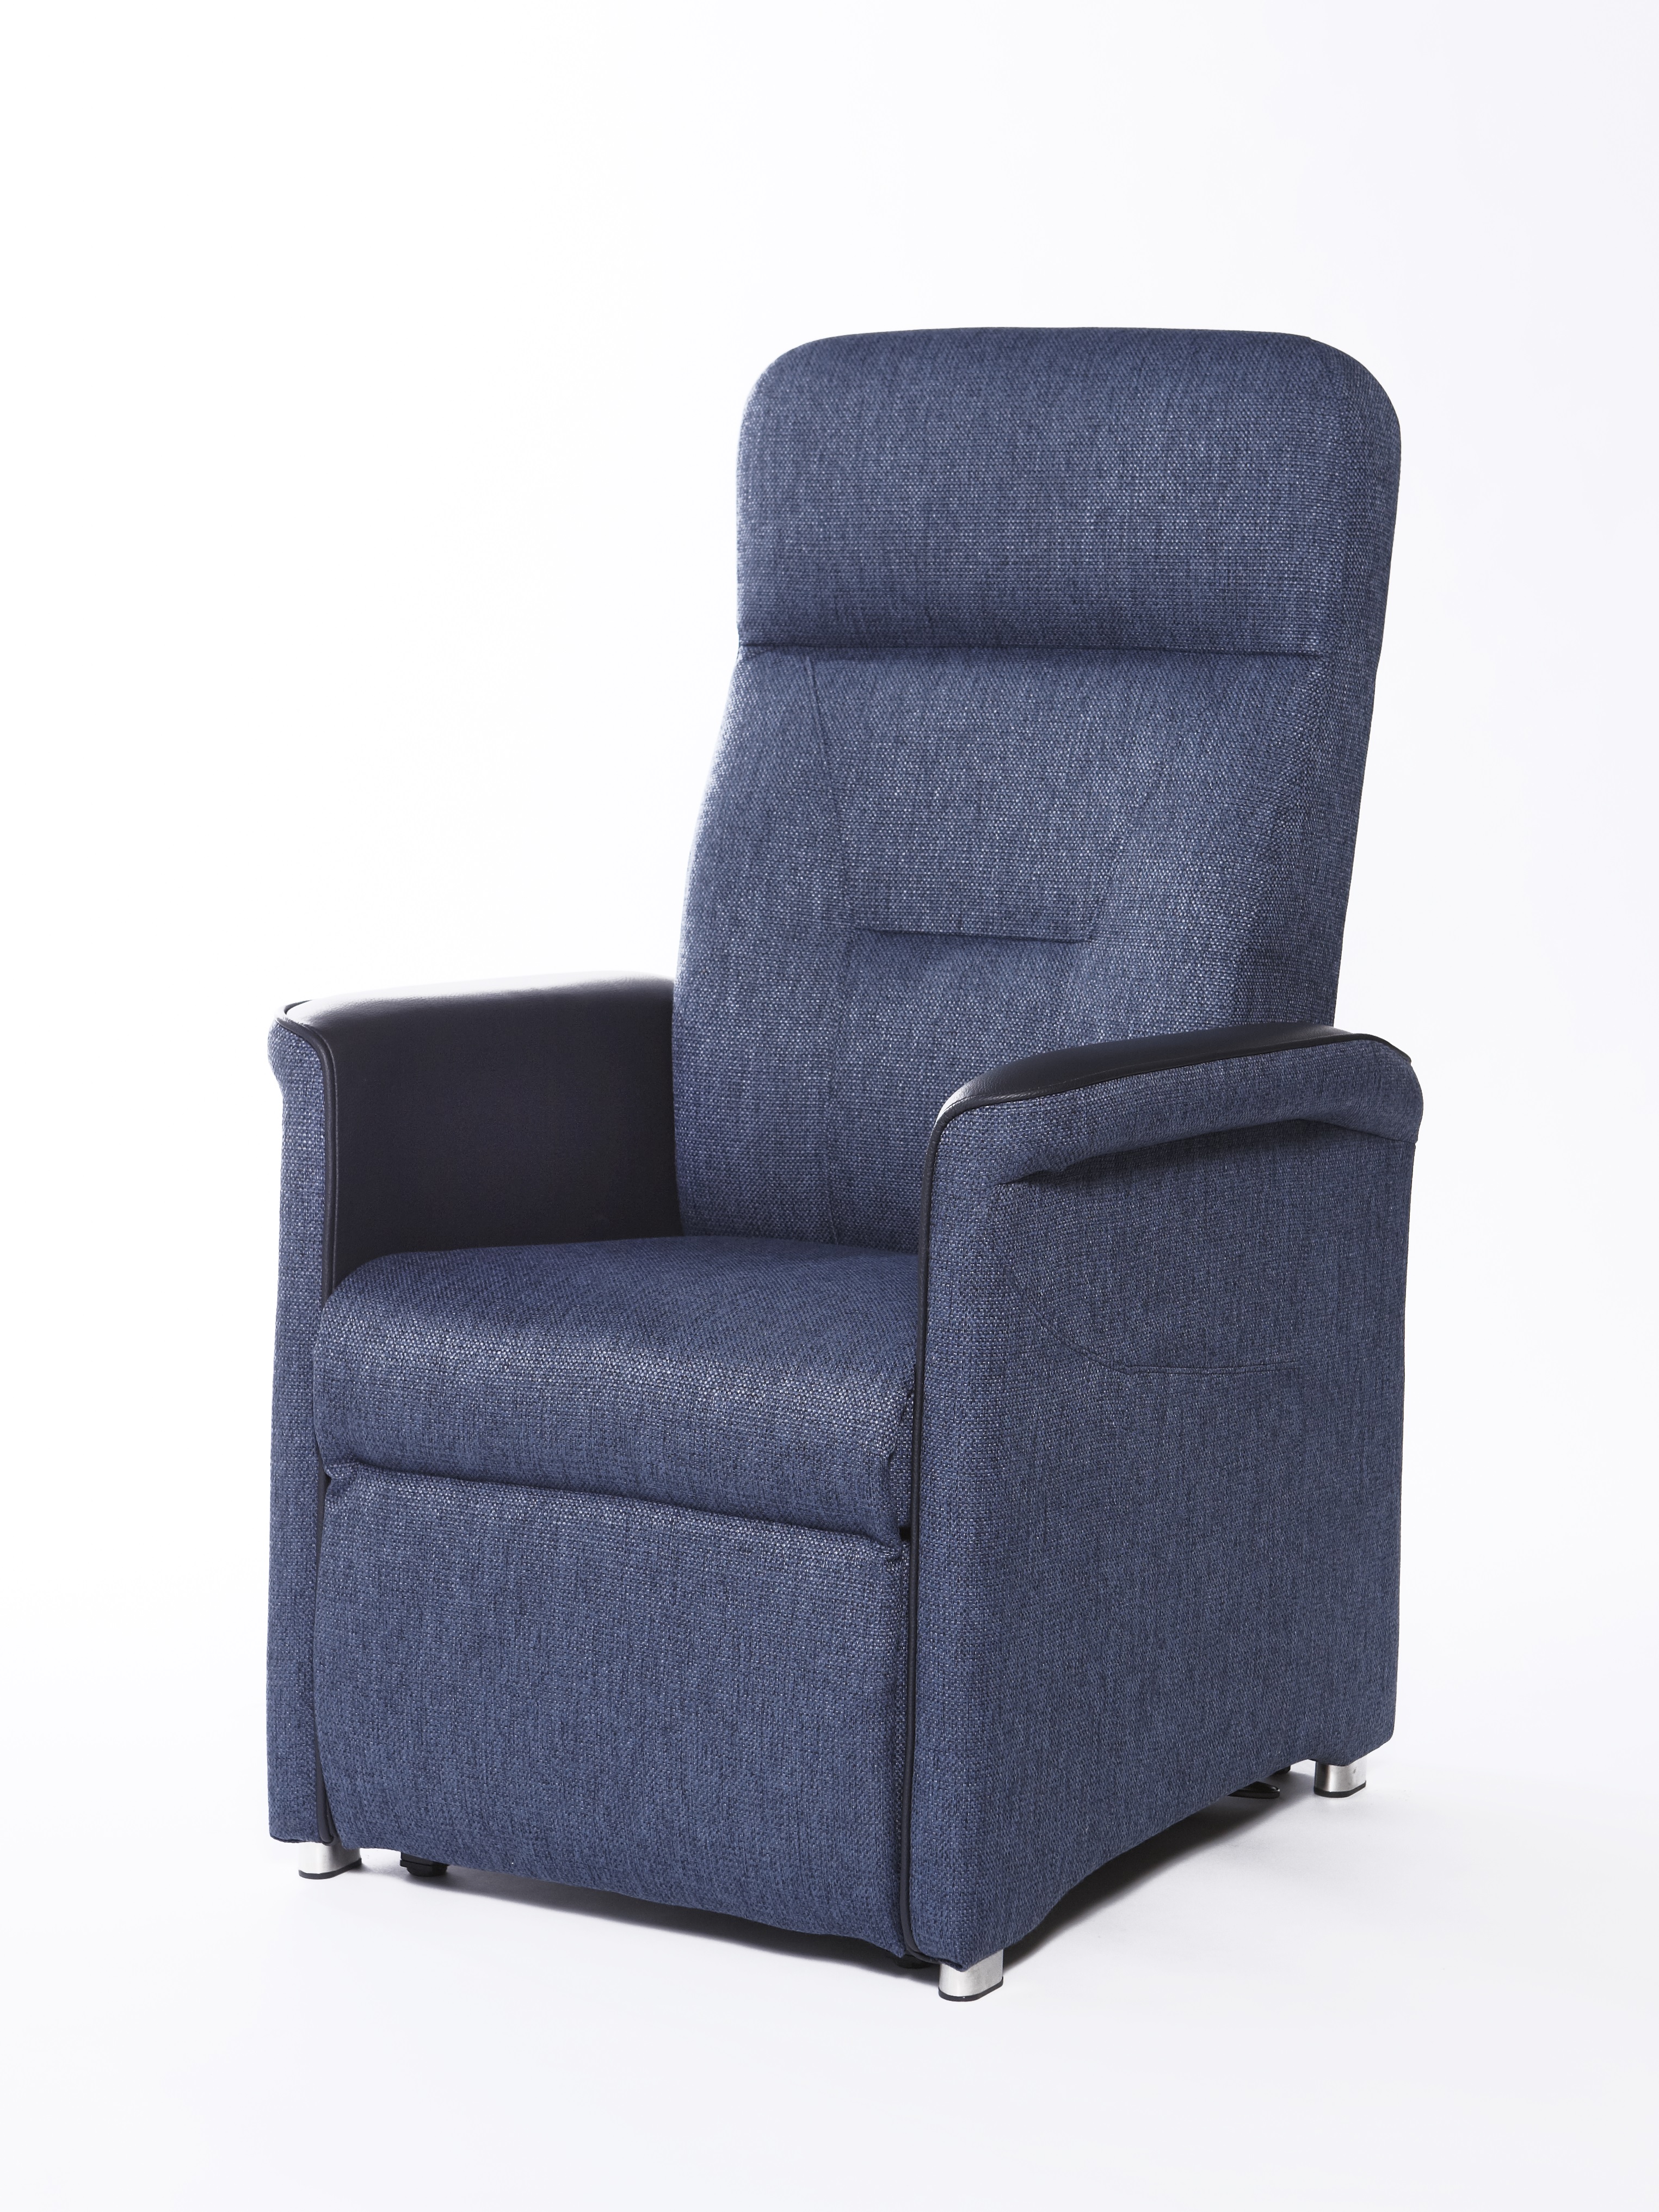 Variance relaxfauteuil - datzitgoed.com